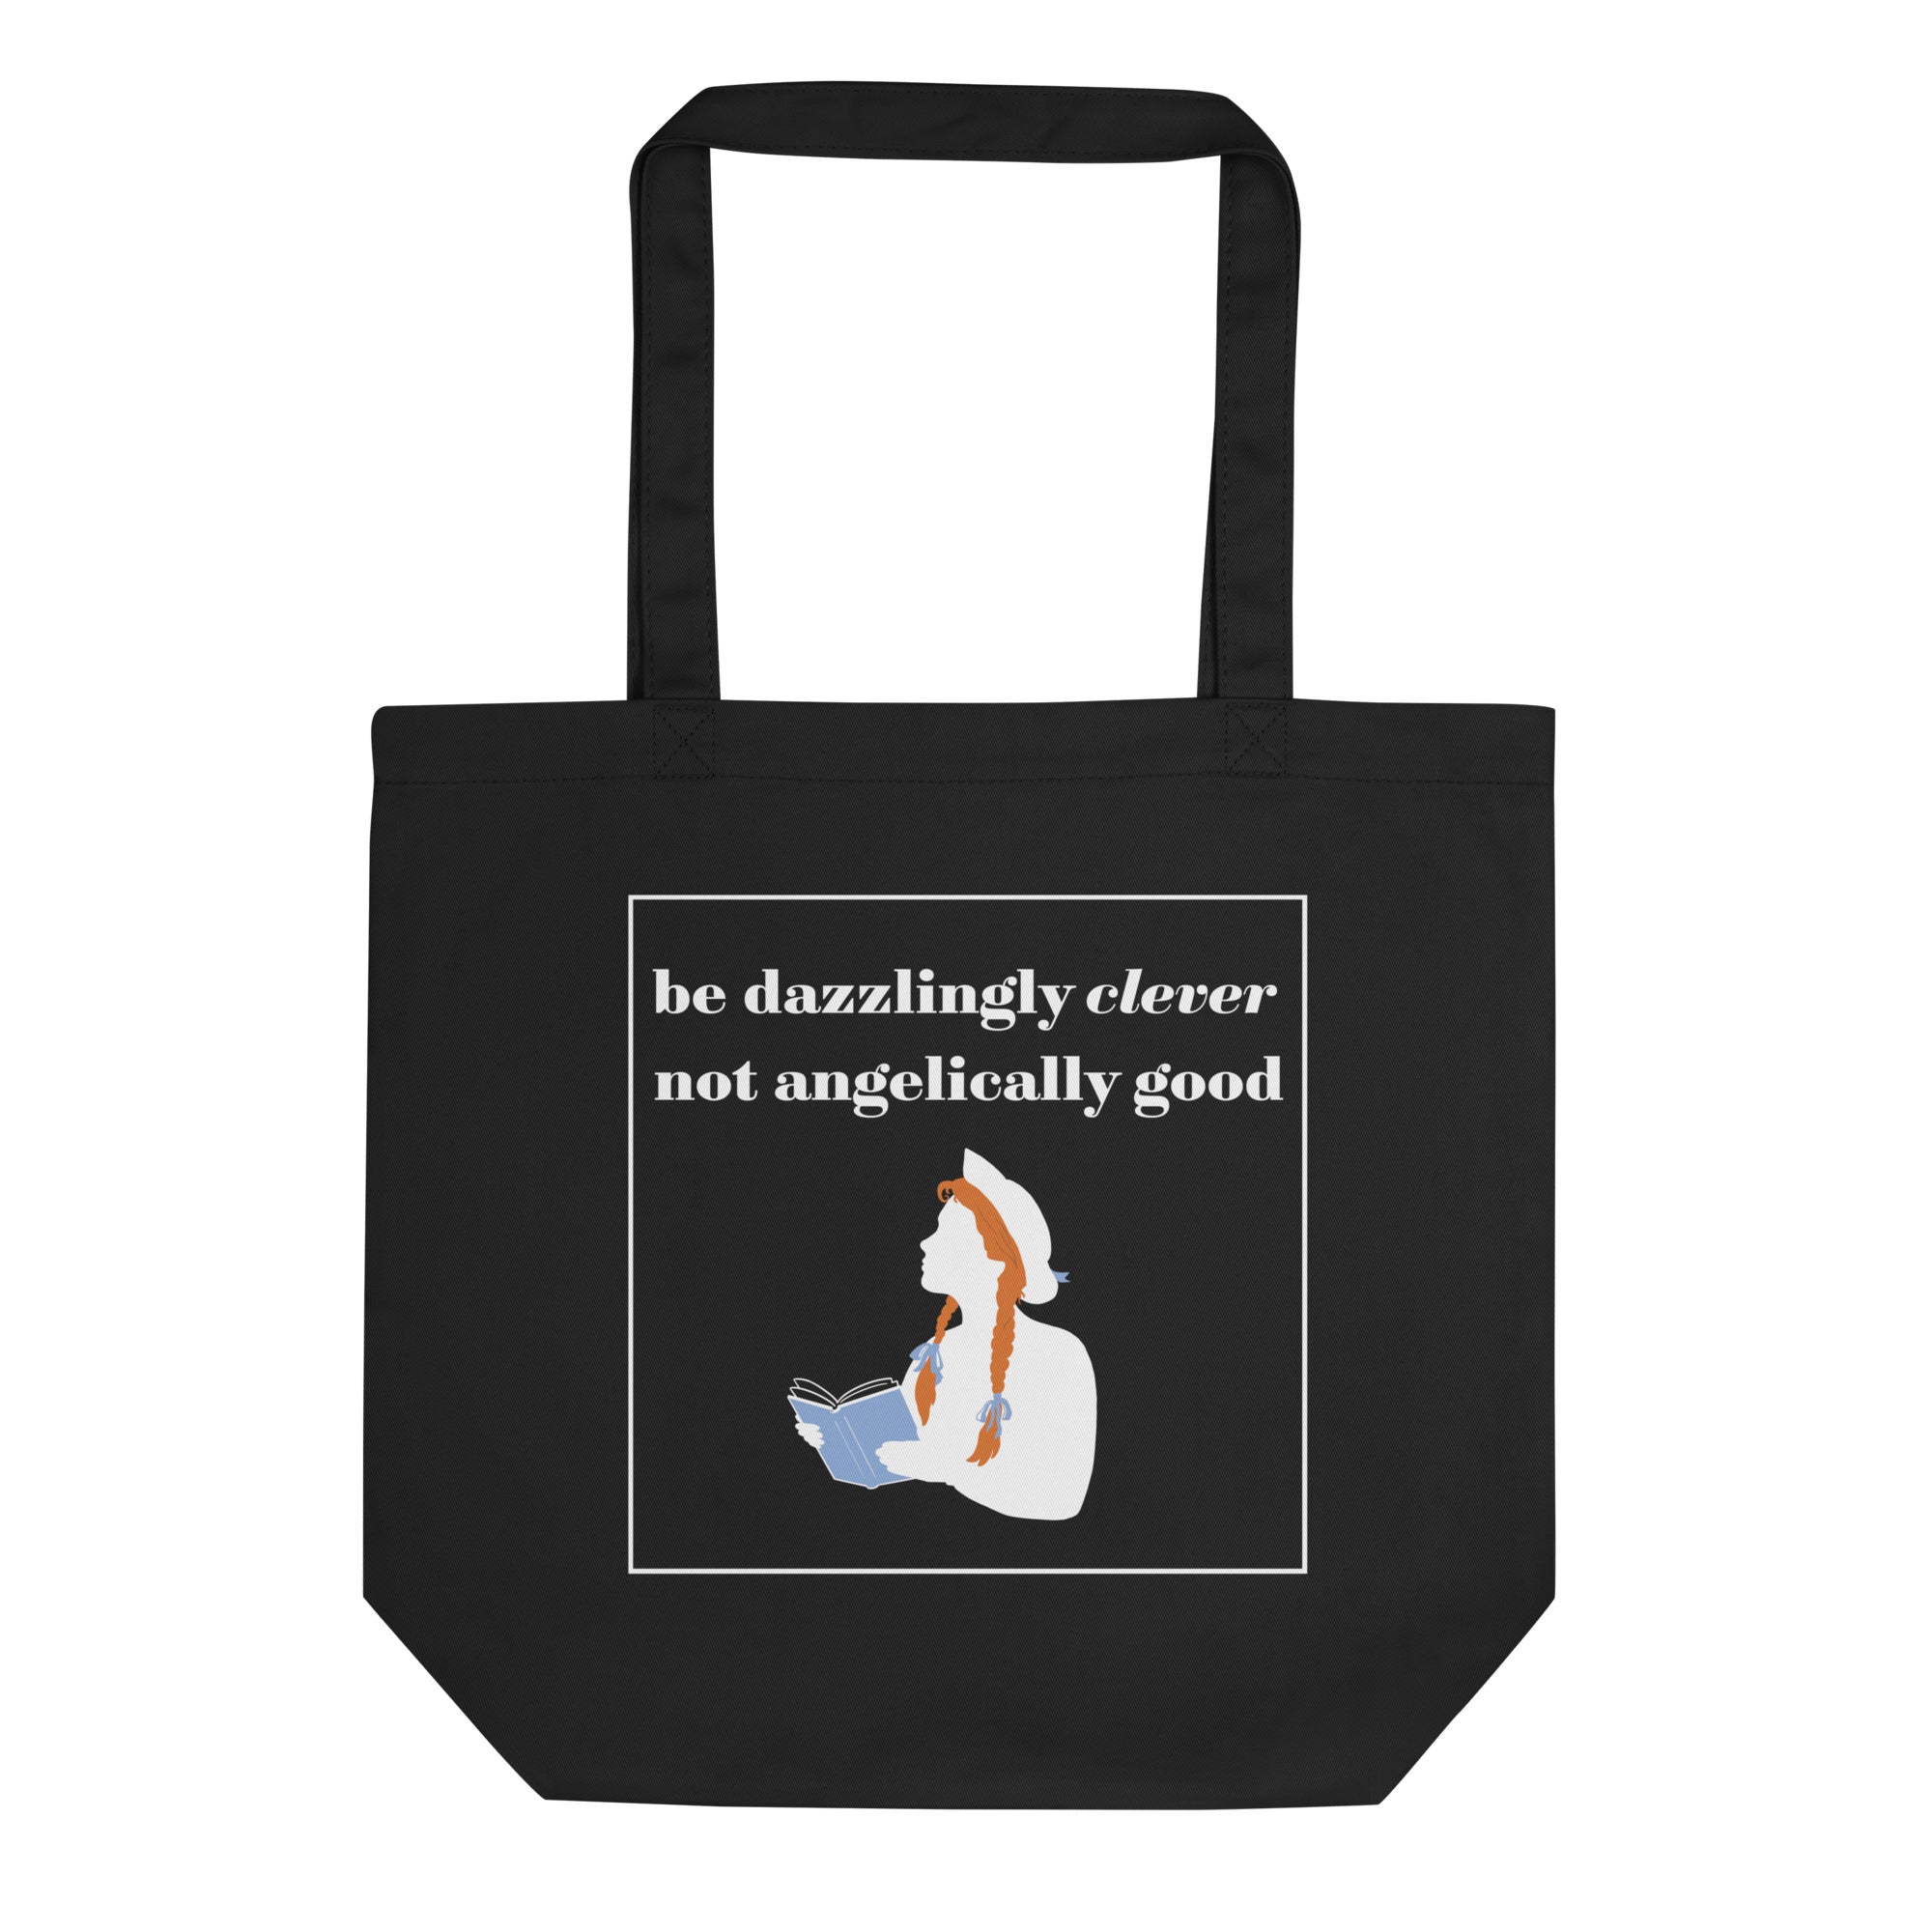 Be Dazzingly Clever Tote Bag